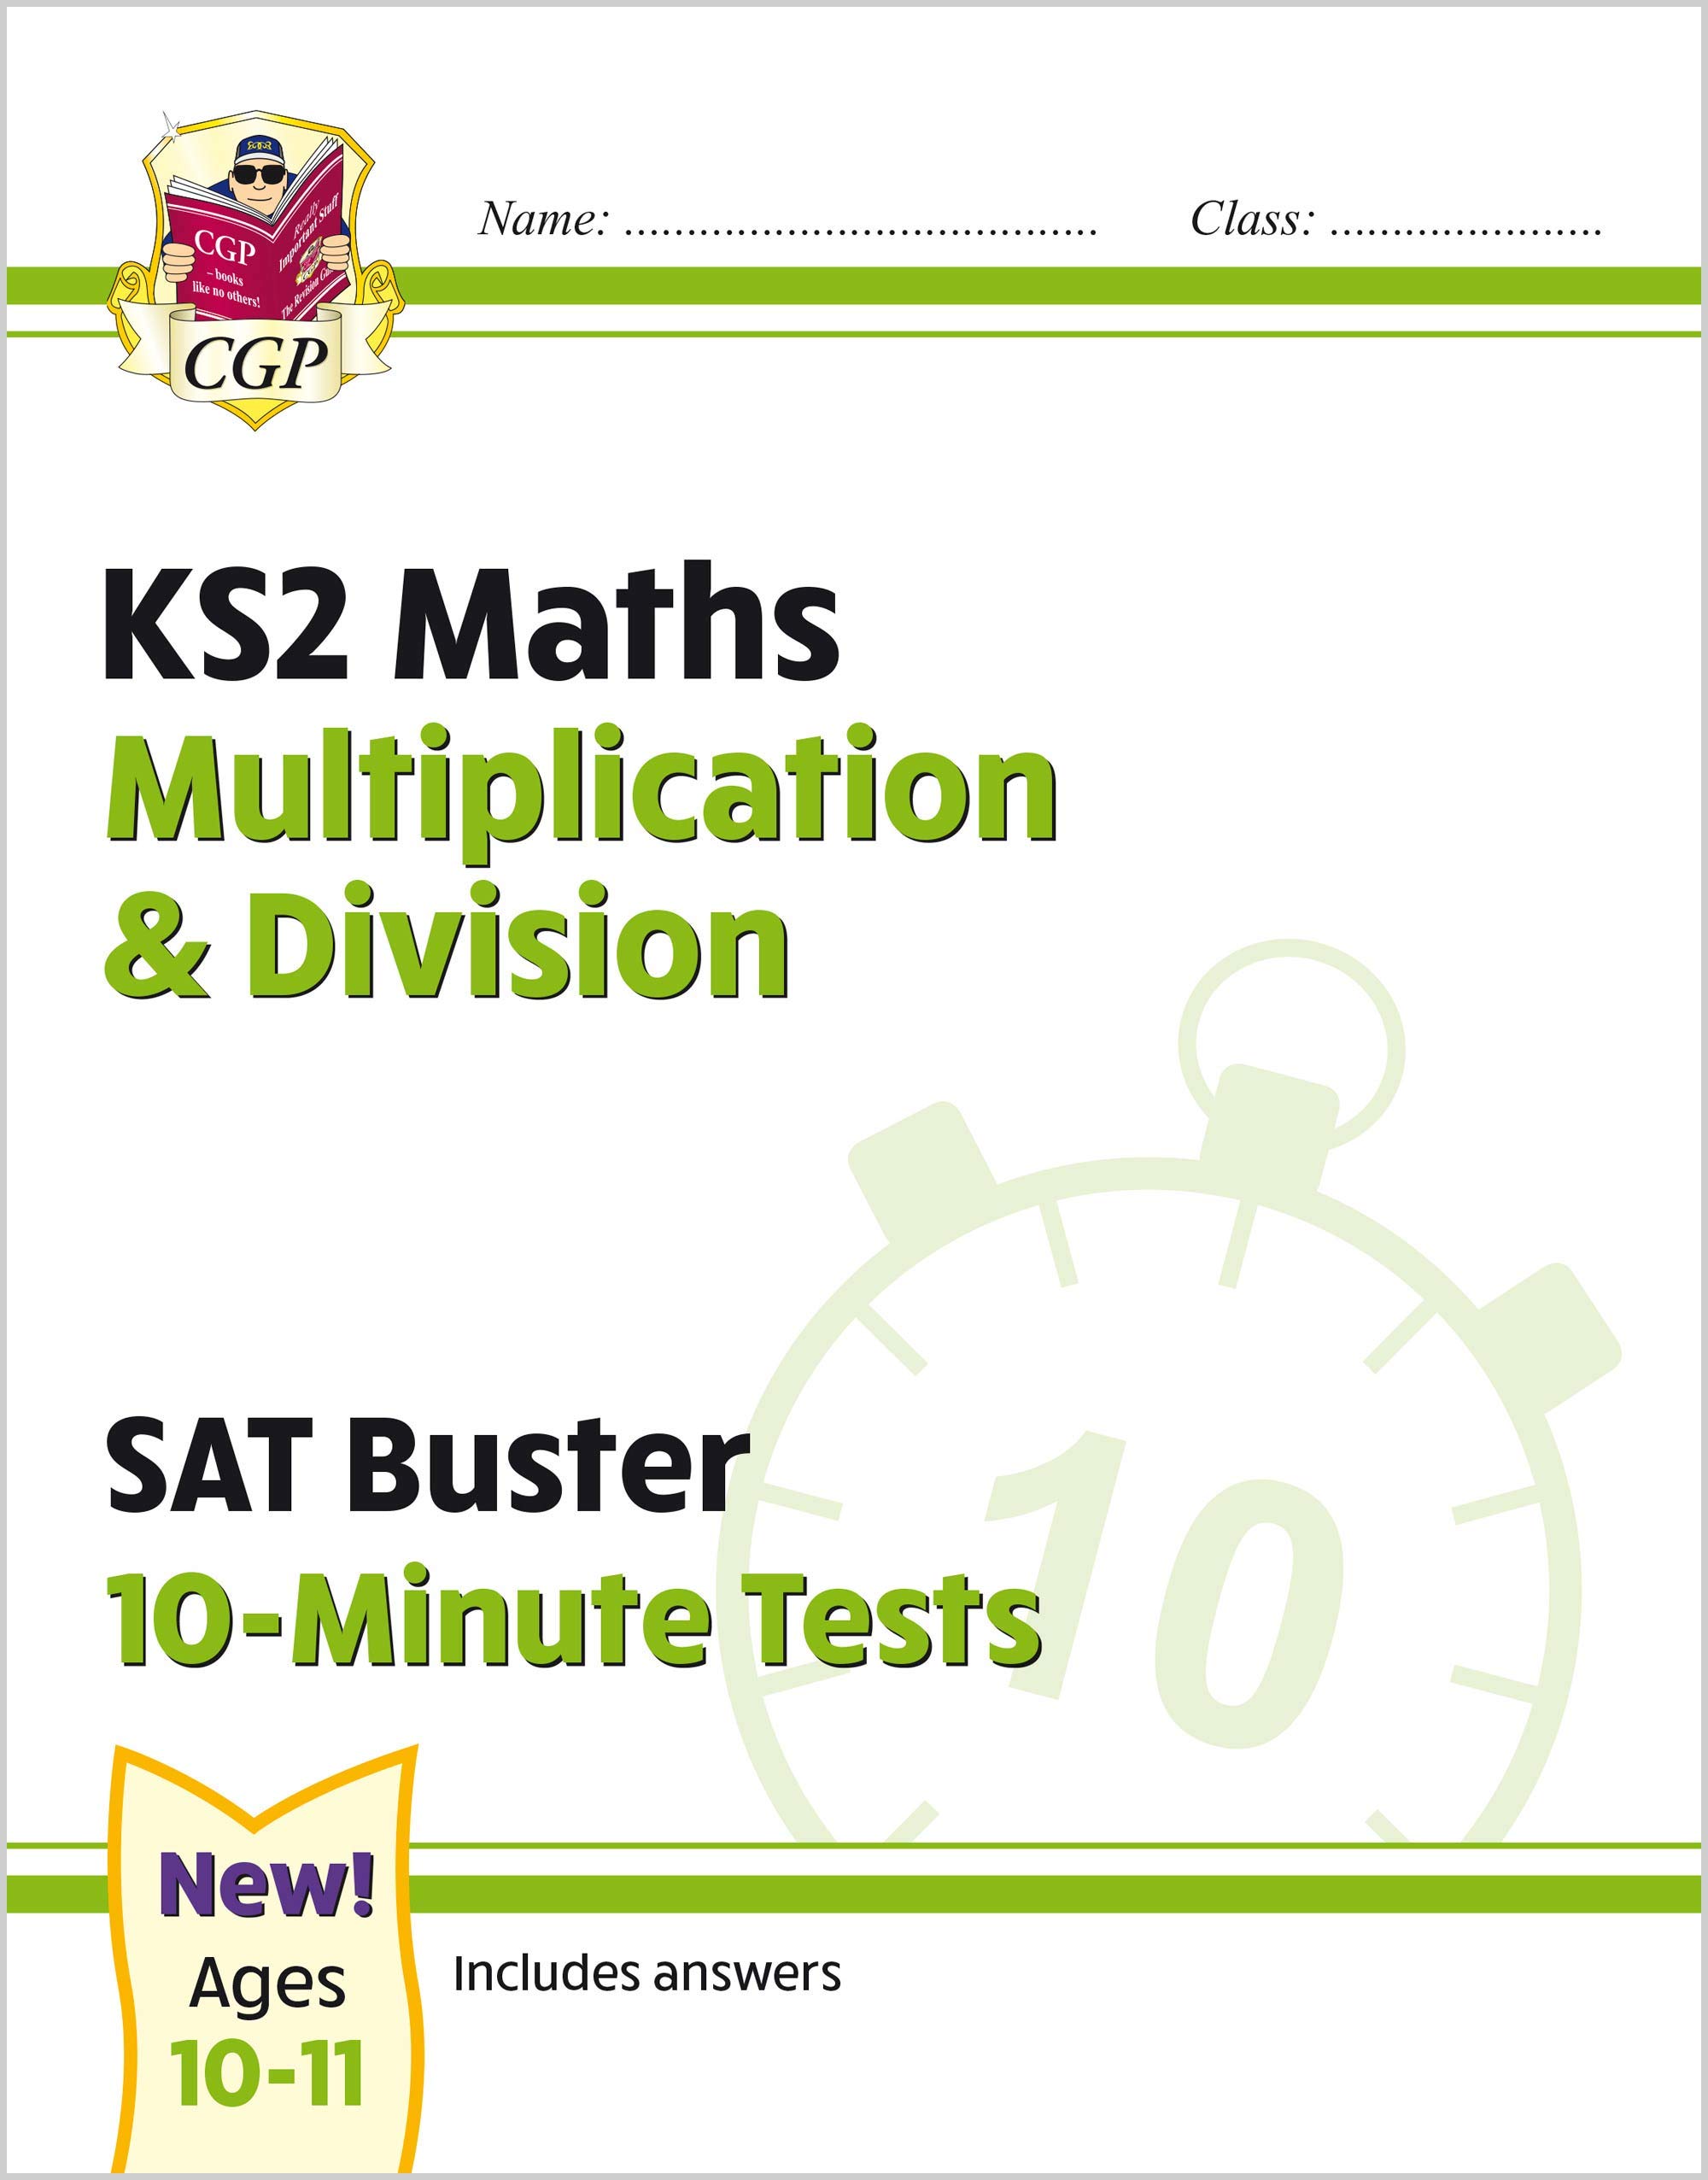 KS2 Maths SAT Buster 10-Minute Tests - Multiplication and Division